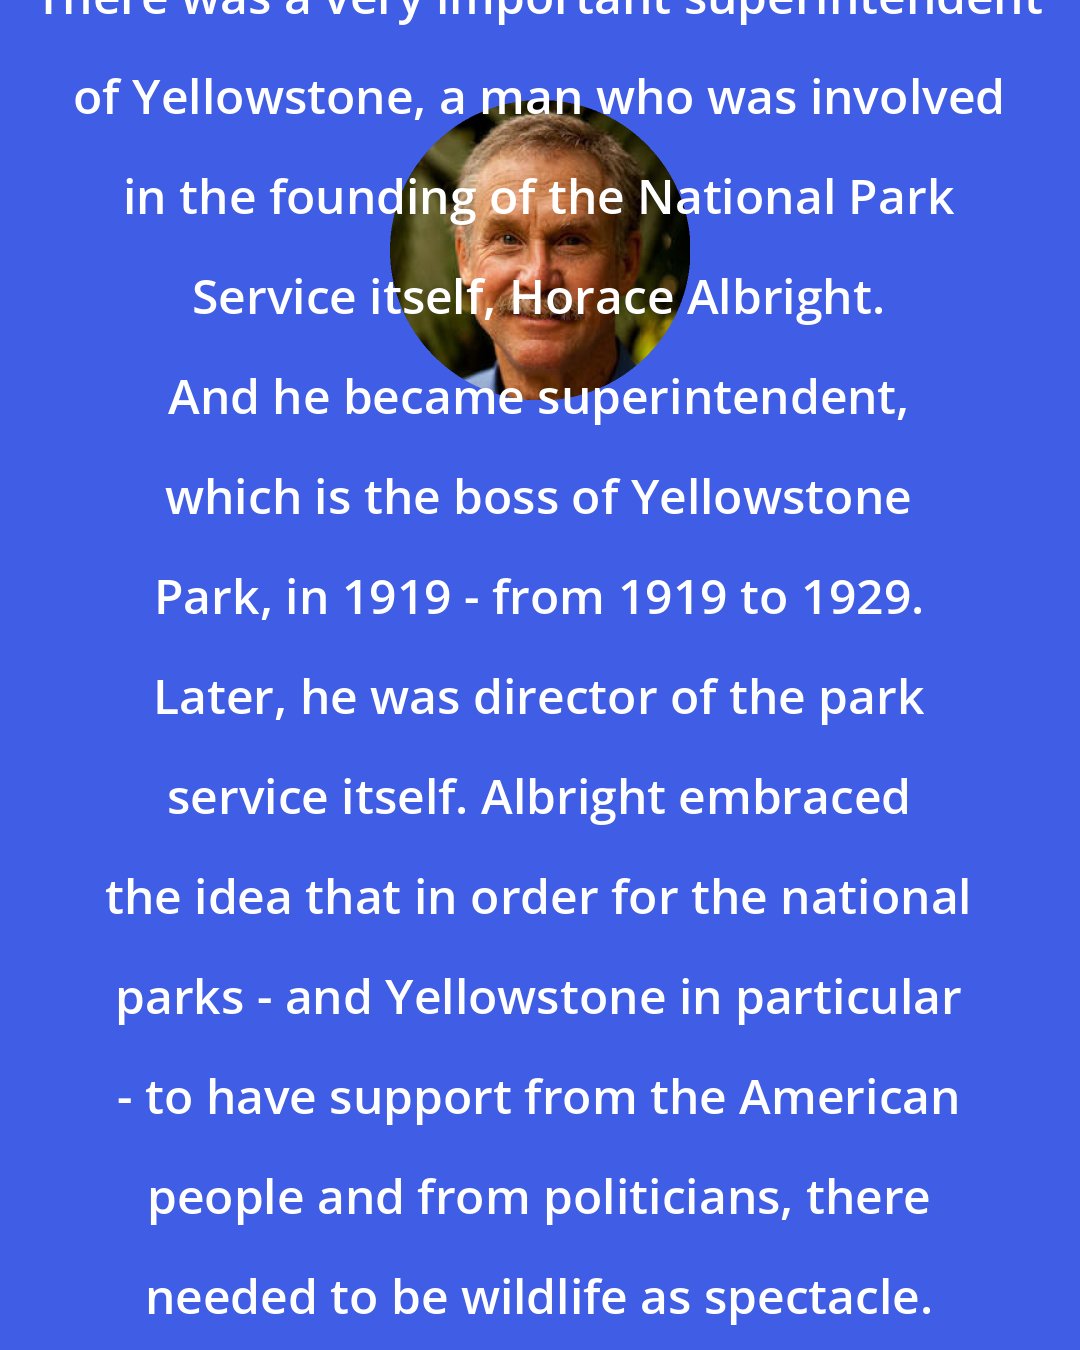 David Quammen: There was a very important superintendent of Yellowstone, a man who was involved in the founding of the National Park Service itself, Horace Albright. And he became superintendent, which is the boss of Yellowstone Park, in 1919 - from 1919 to 1929. Later, he was director of the park service itself. Albright embraced the idea that in order for the national parks - and Yellowstone in particular - to have support from the American people and from politicians, there needed to be wildlife as spectacle.